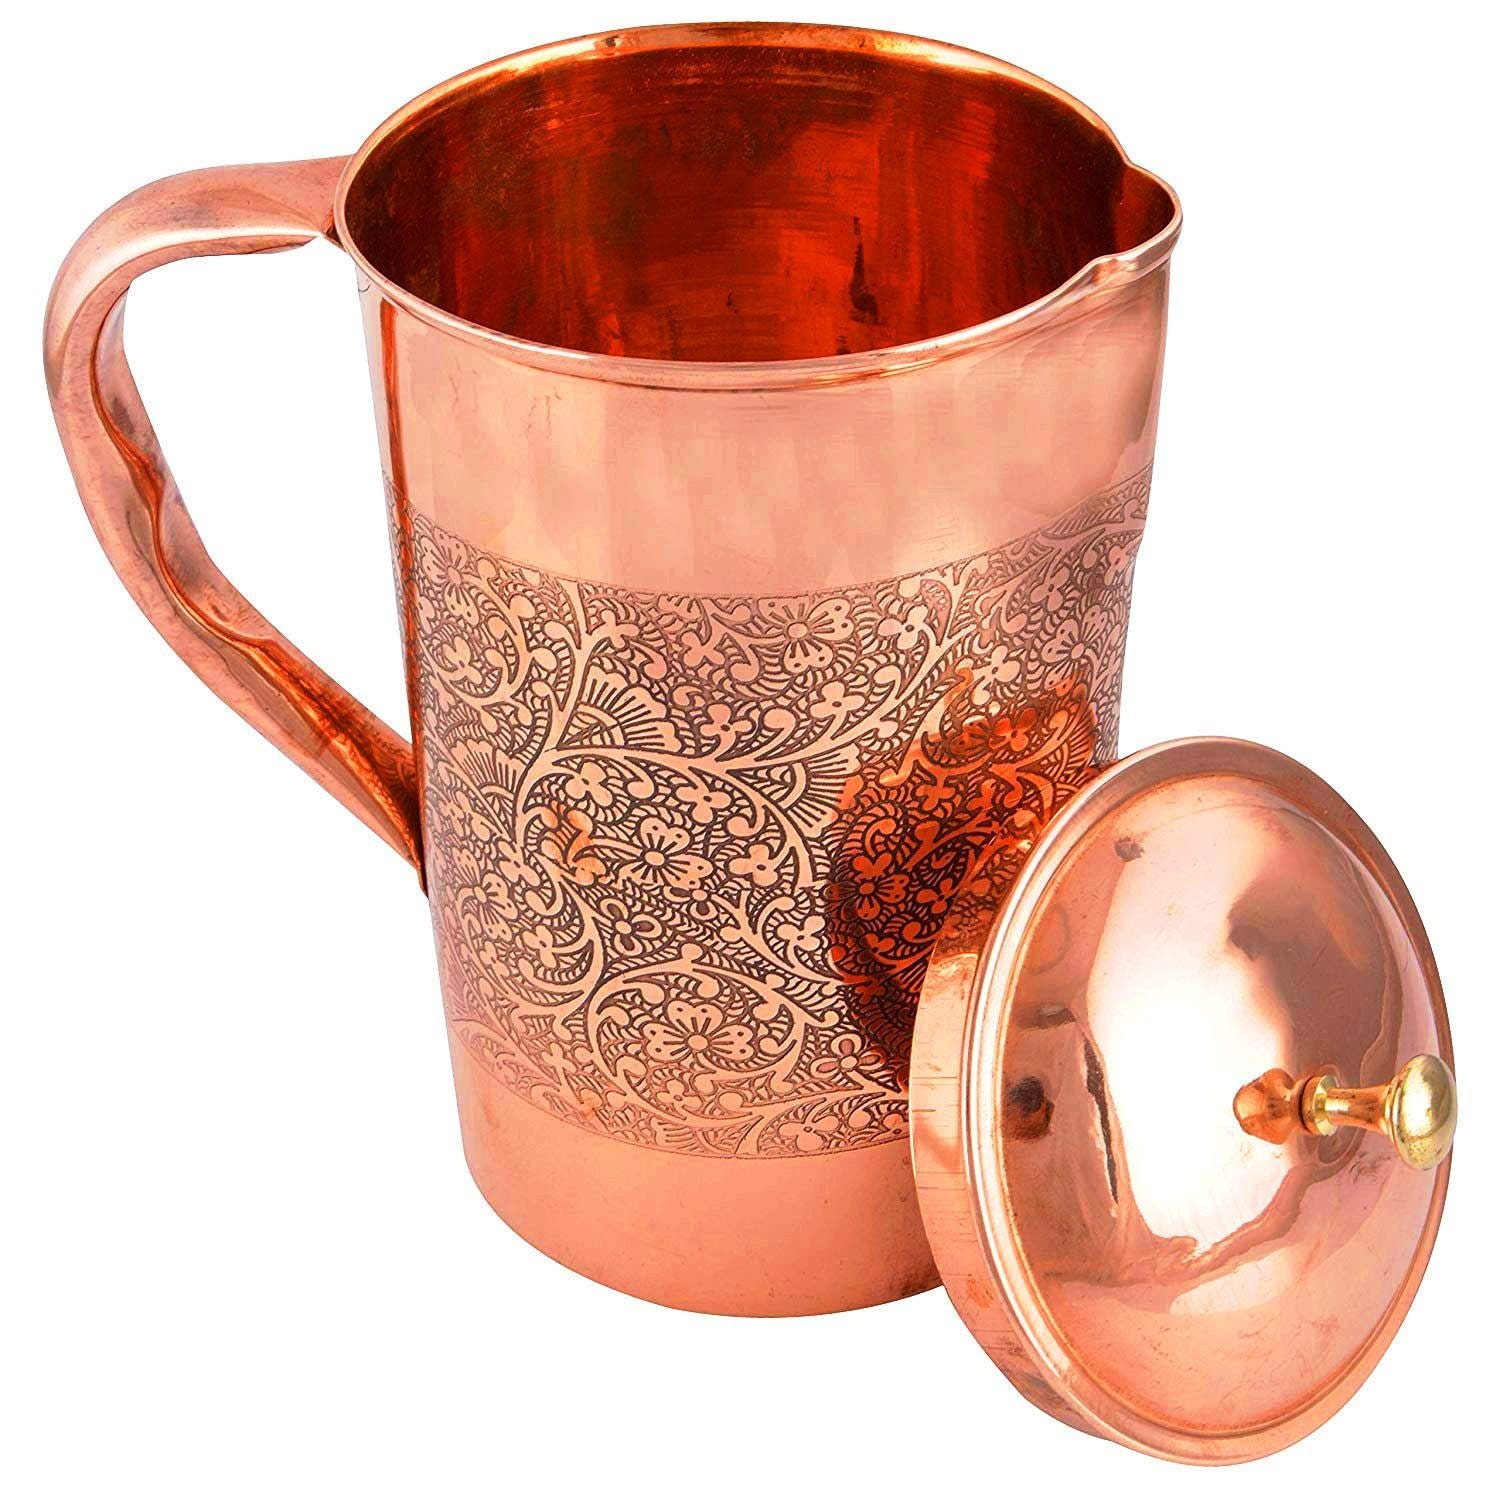 Pure Copper Water Pitcher Jug 1500 ml For Ayurveda Yoga Health Benefits 100% NEW